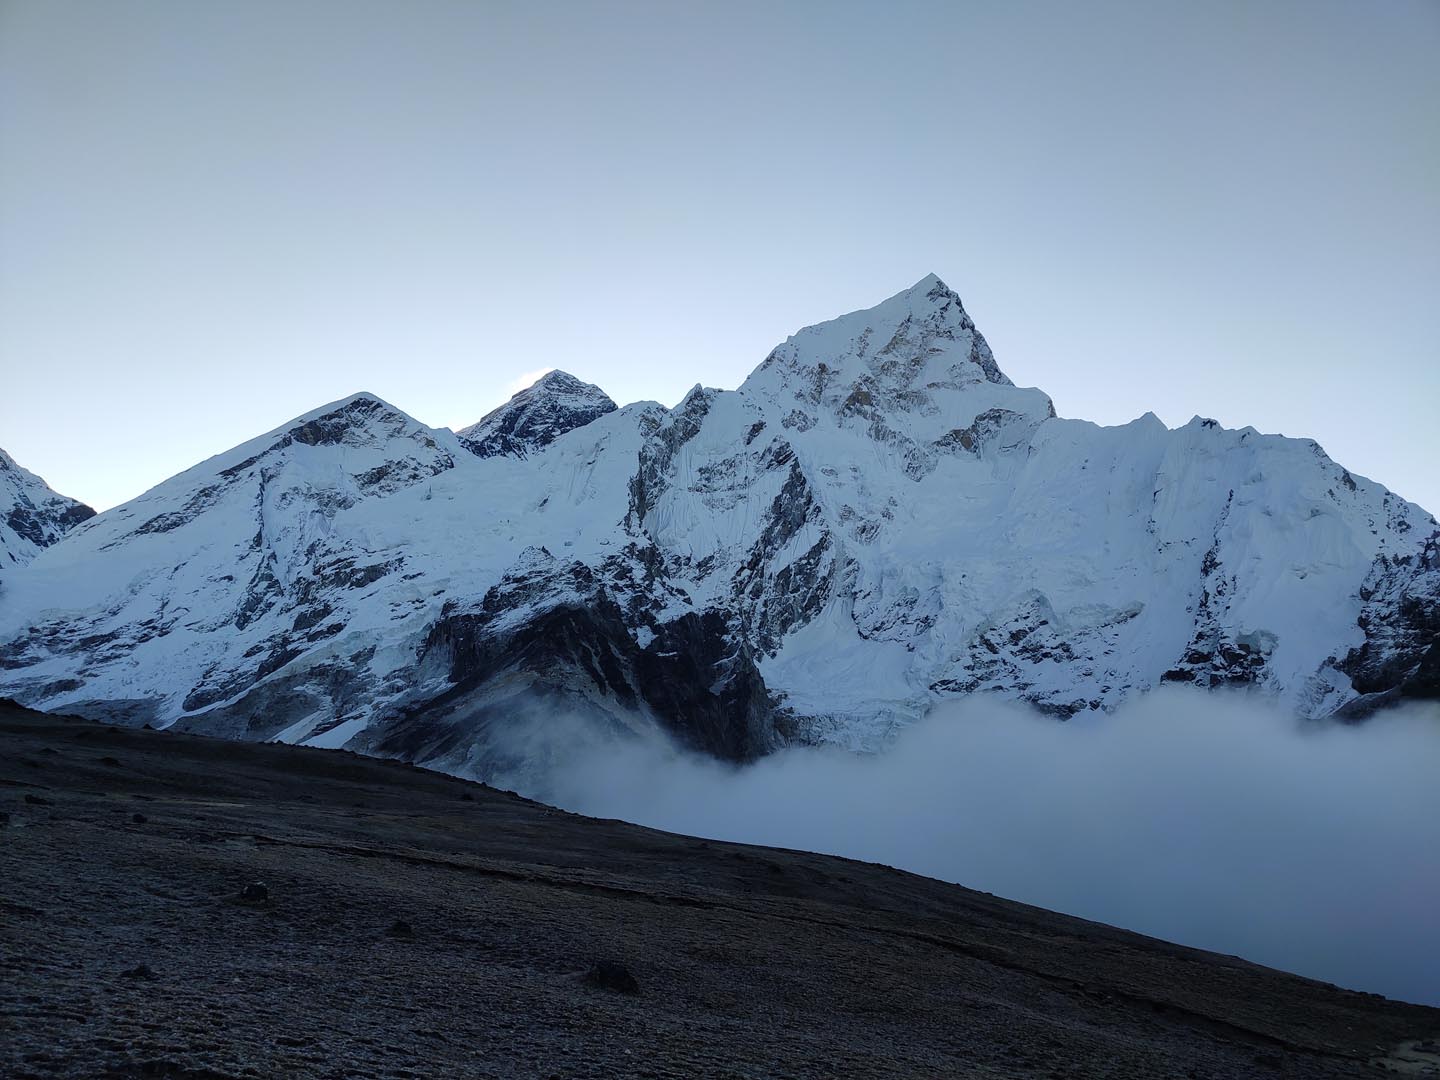 Early morning view from Kala Patthar